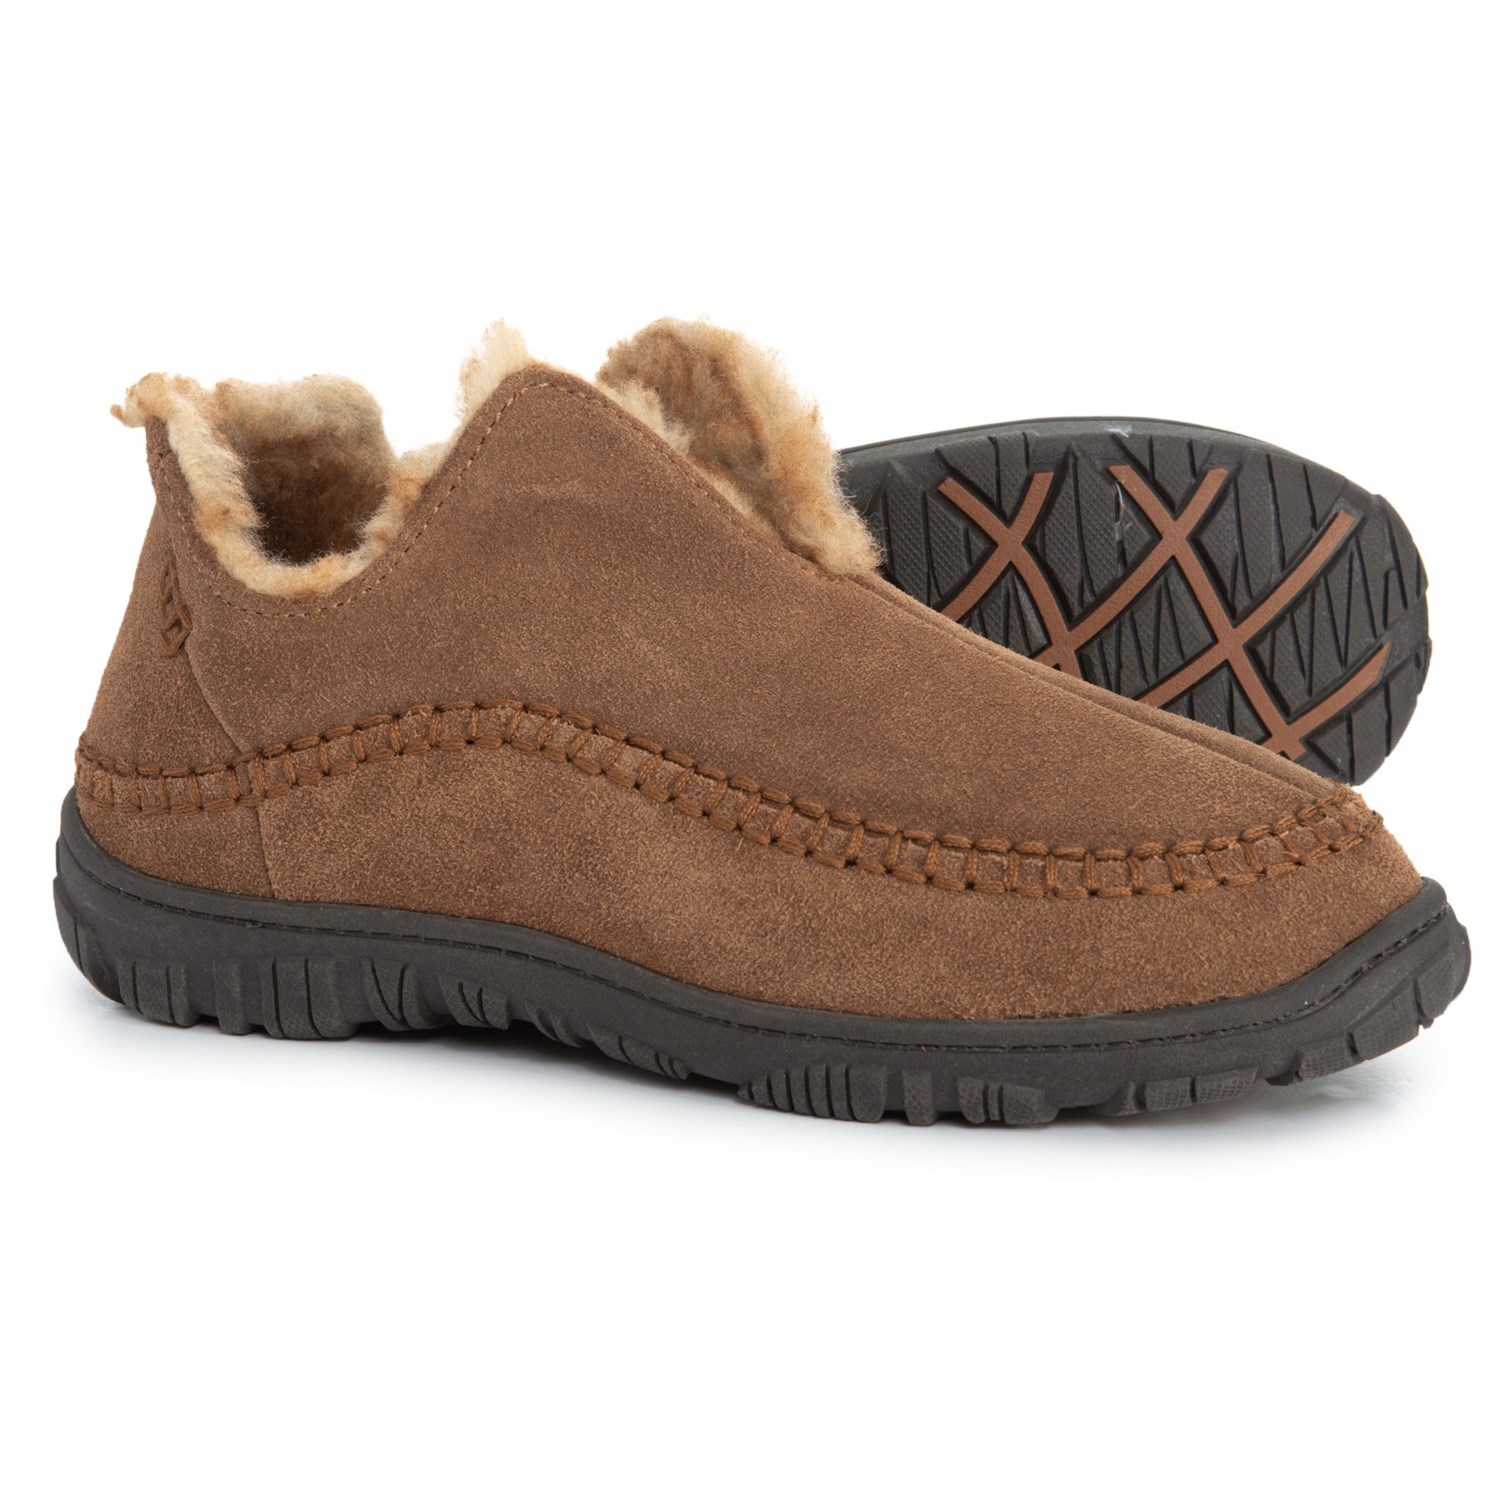 Clarks Moc-Toe Slippers – Suede (For Men)